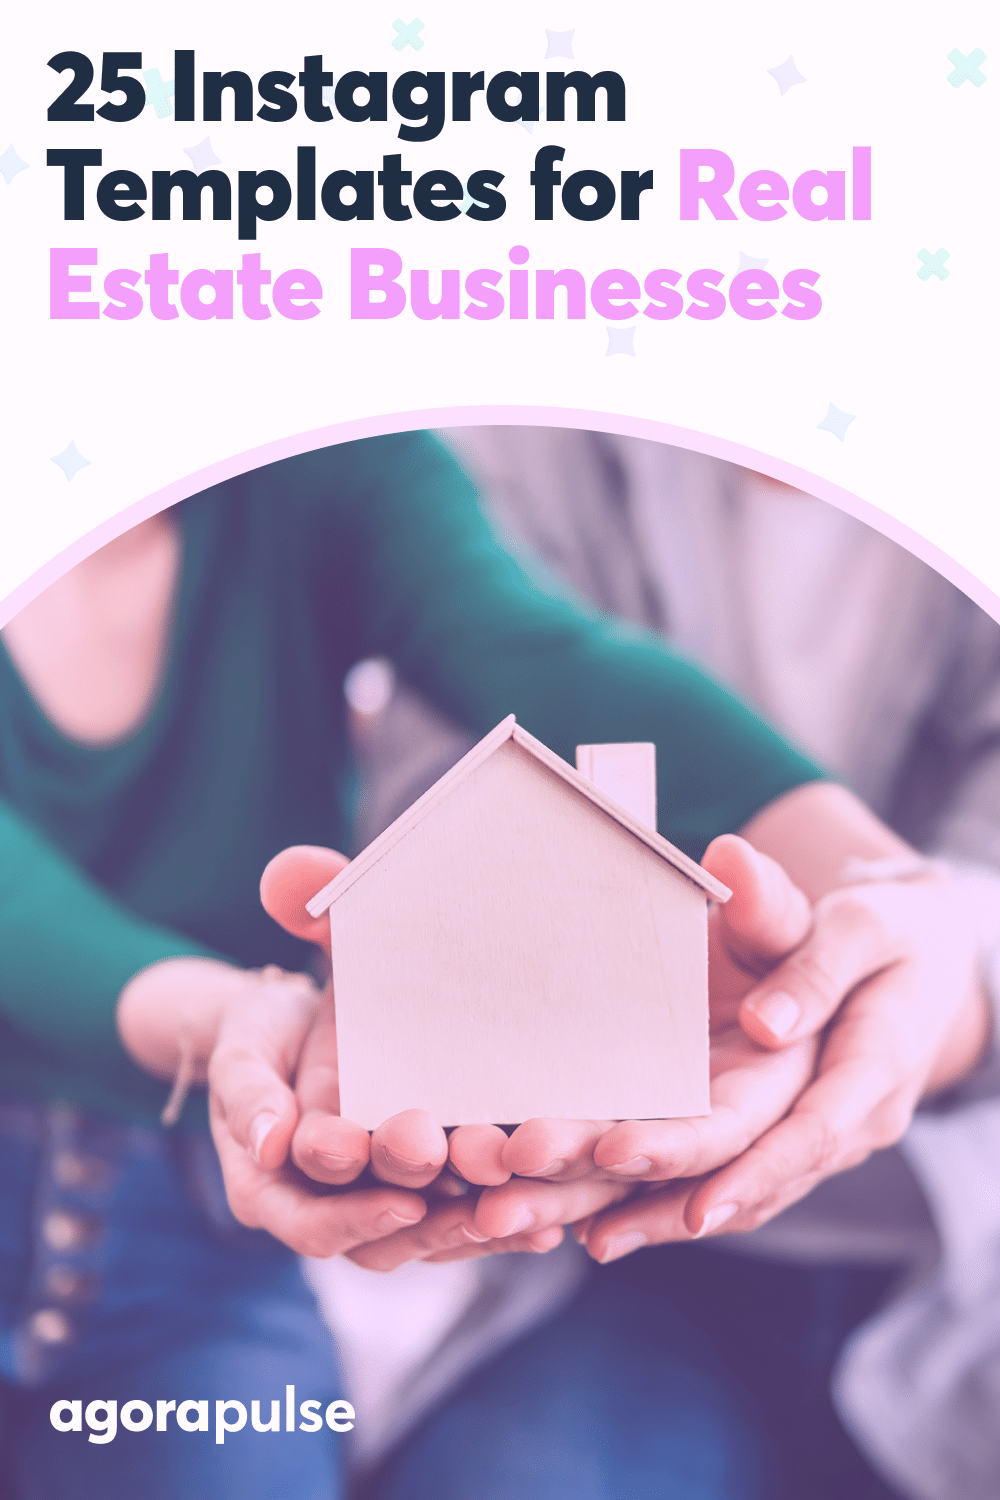 25 Instagram Templates for Real Estate Businesses